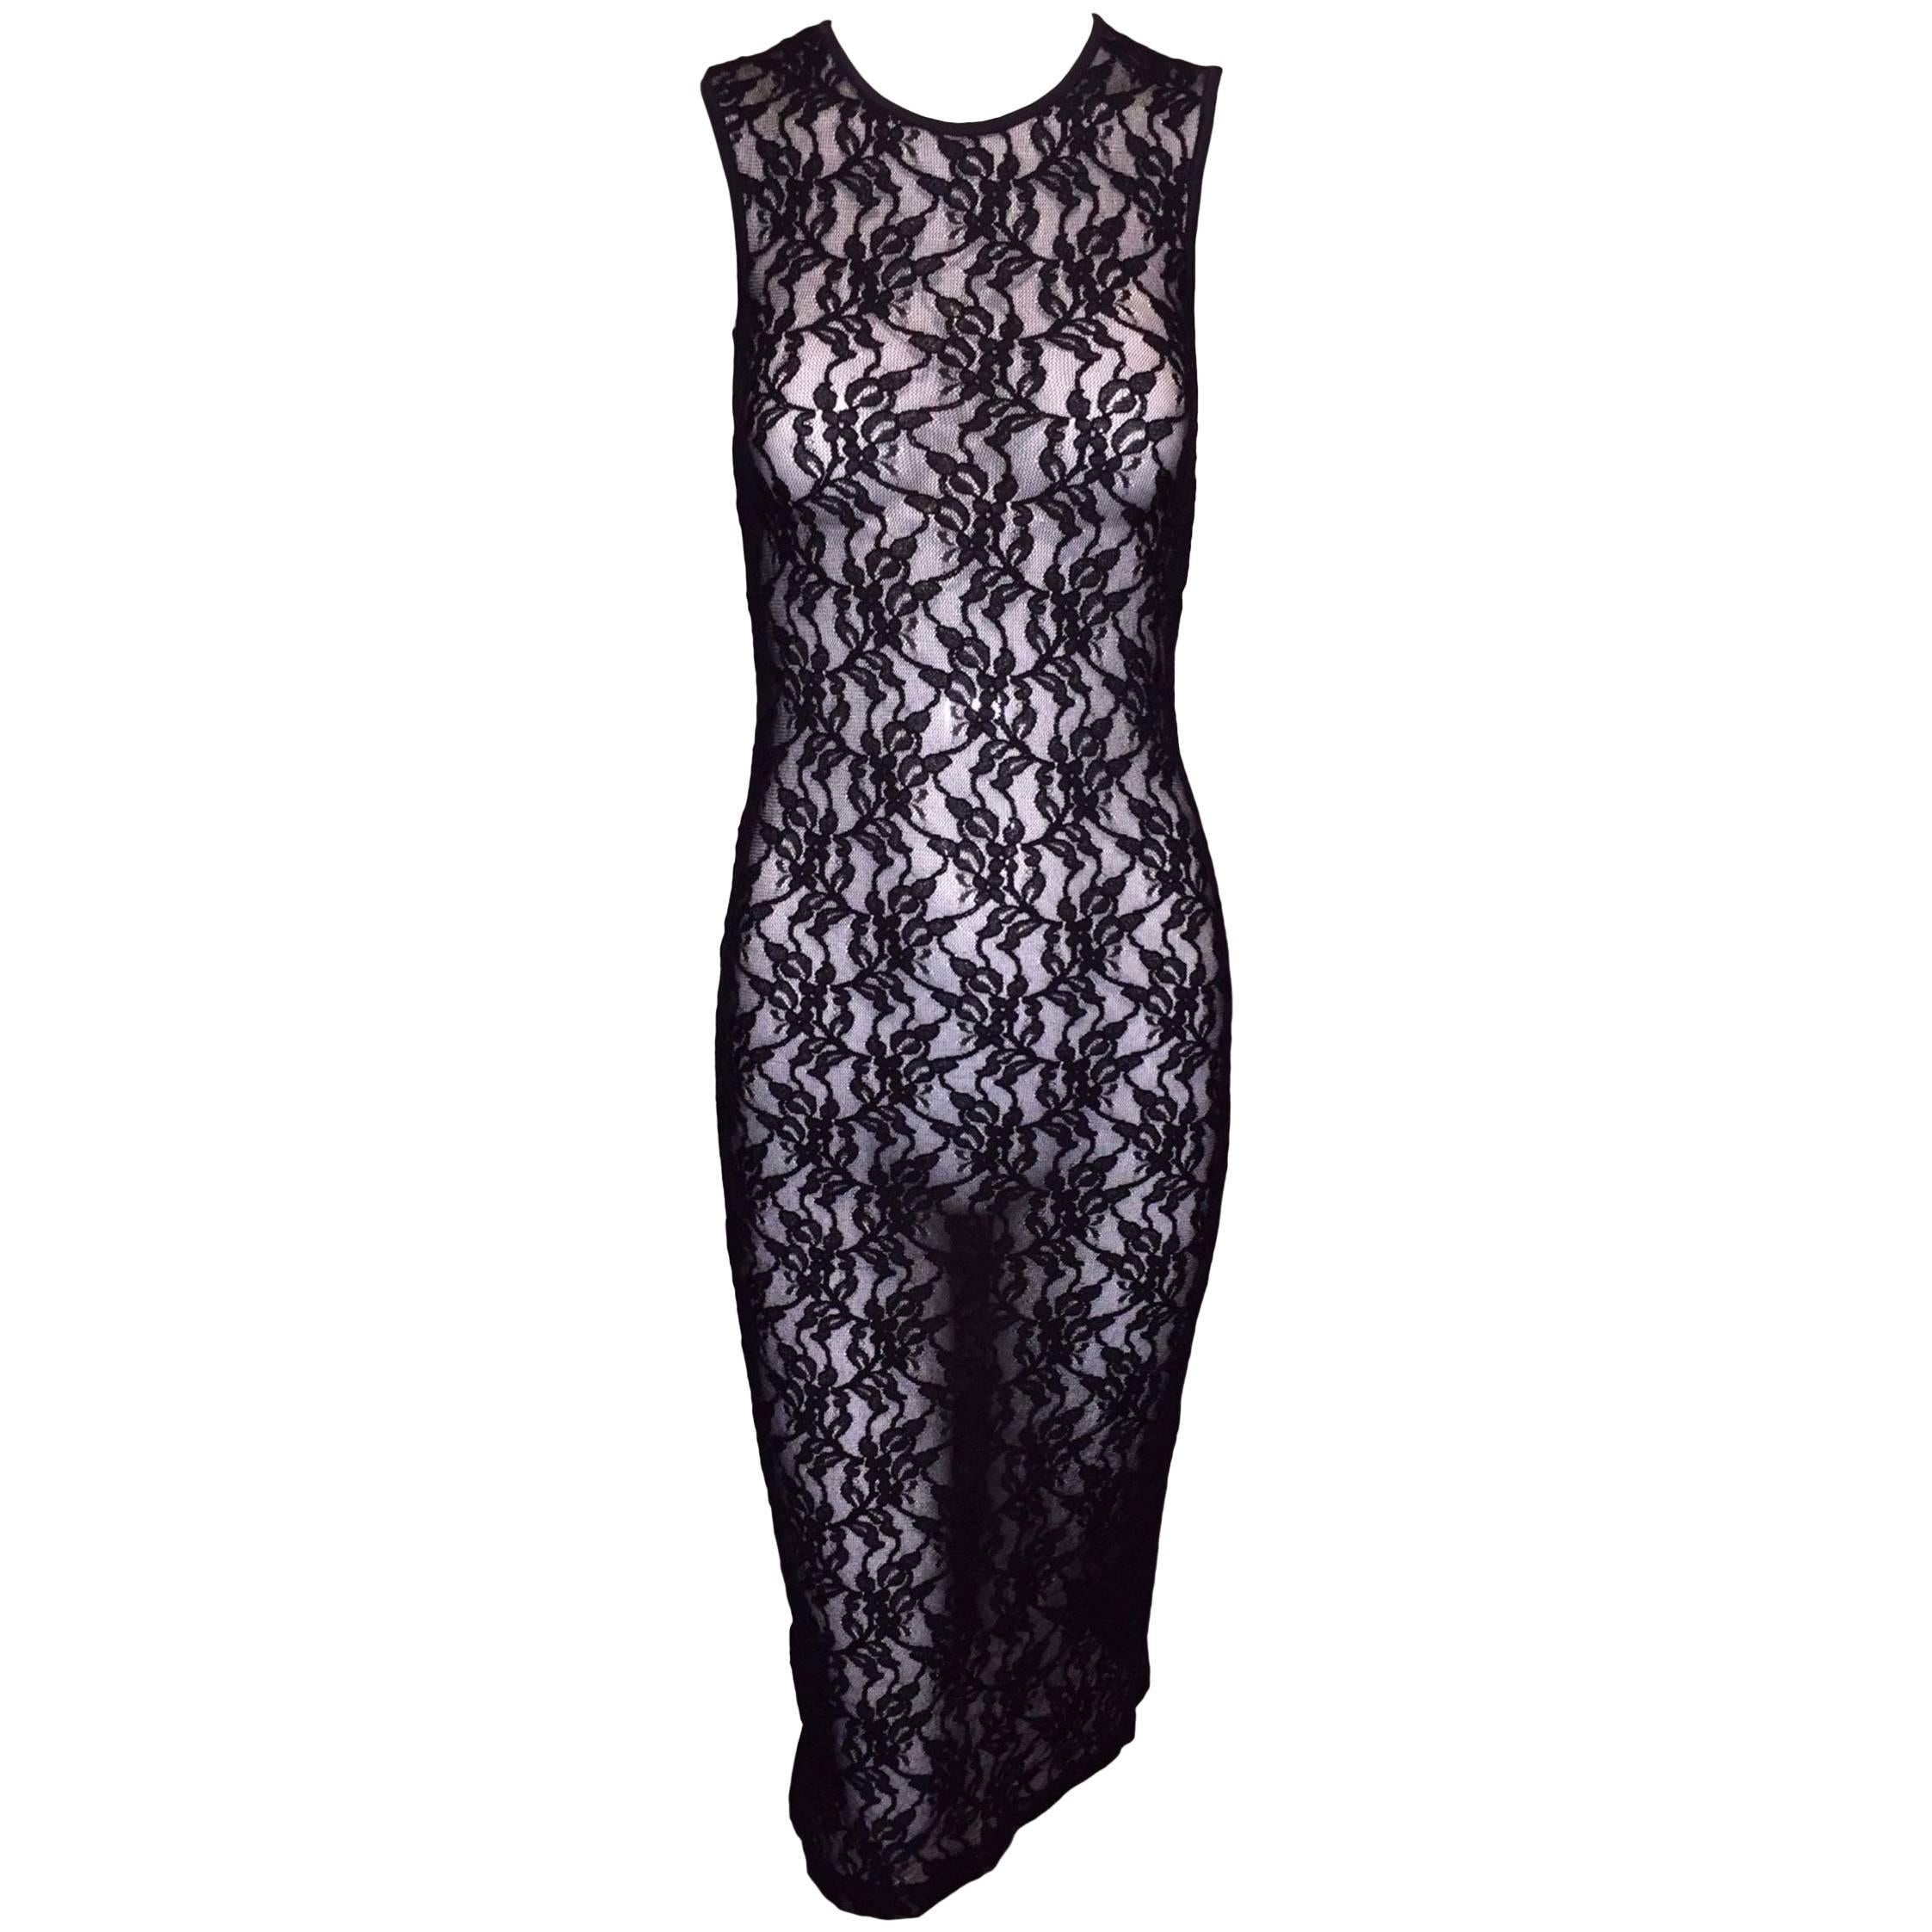 NWT 1990's D&G by Dolce & Gabbana Black Mesh & Lace Sheer Wiggle Dress XS/S